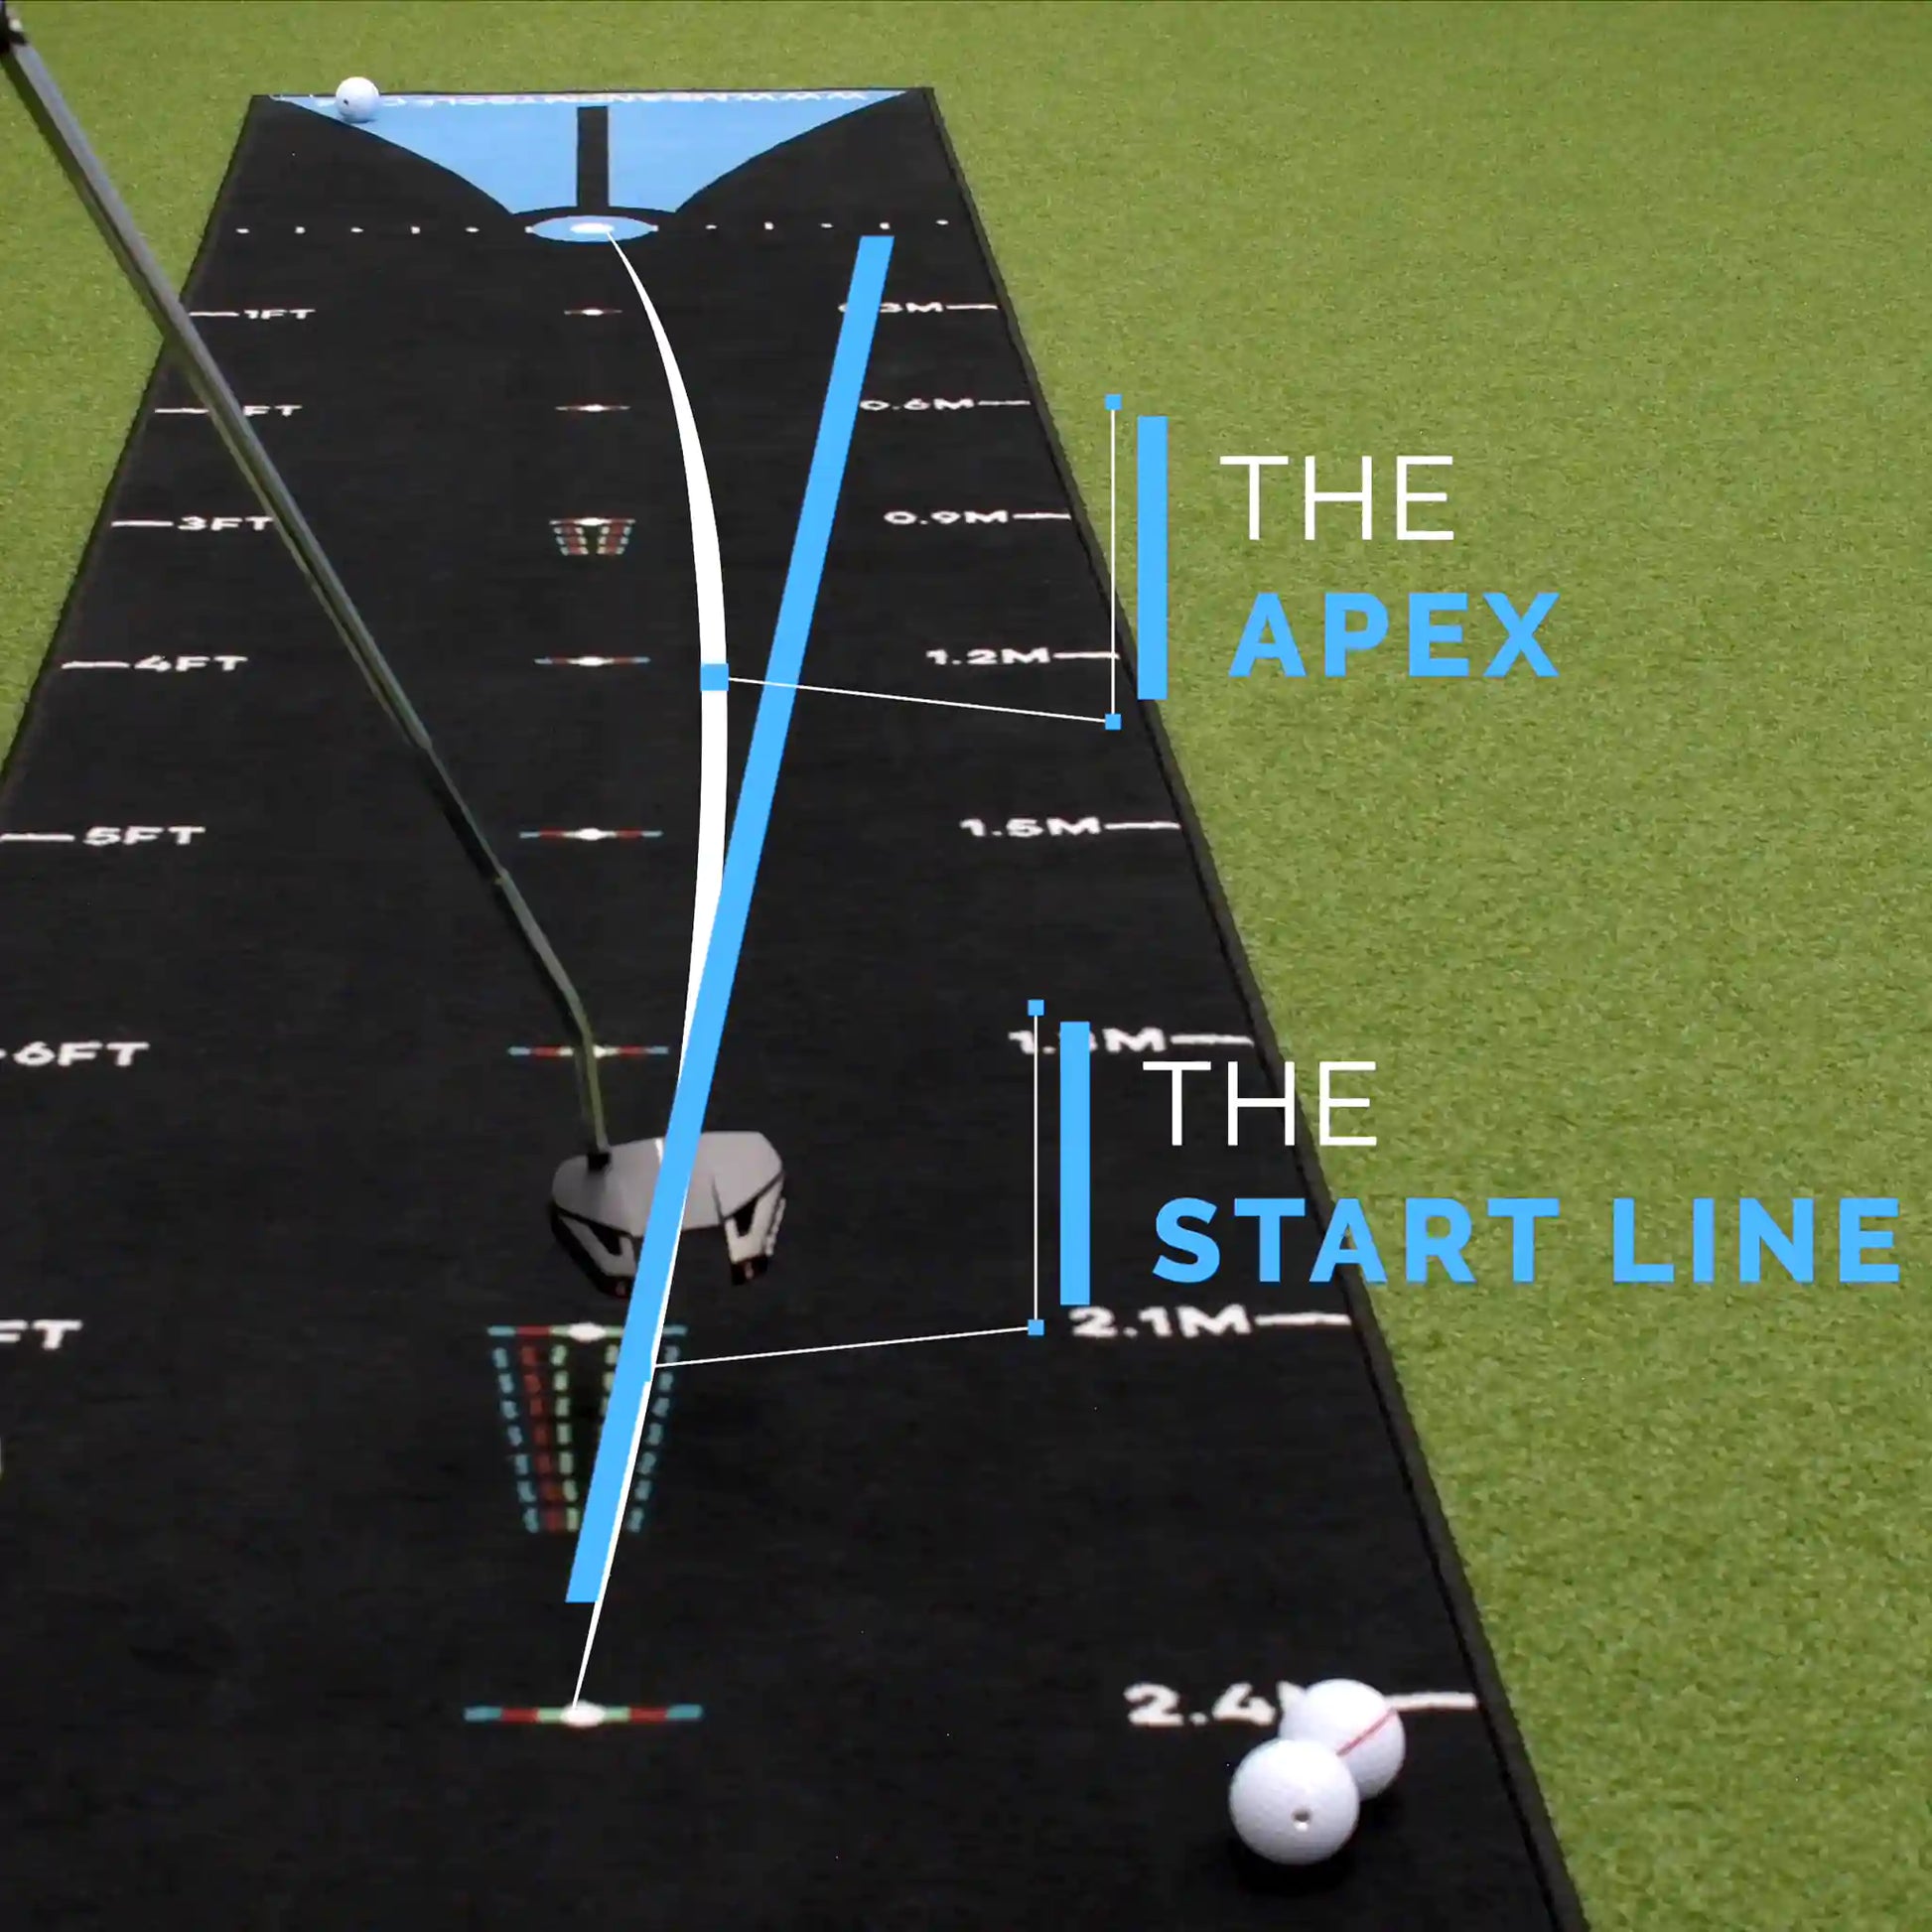 Start line and apex of the putt